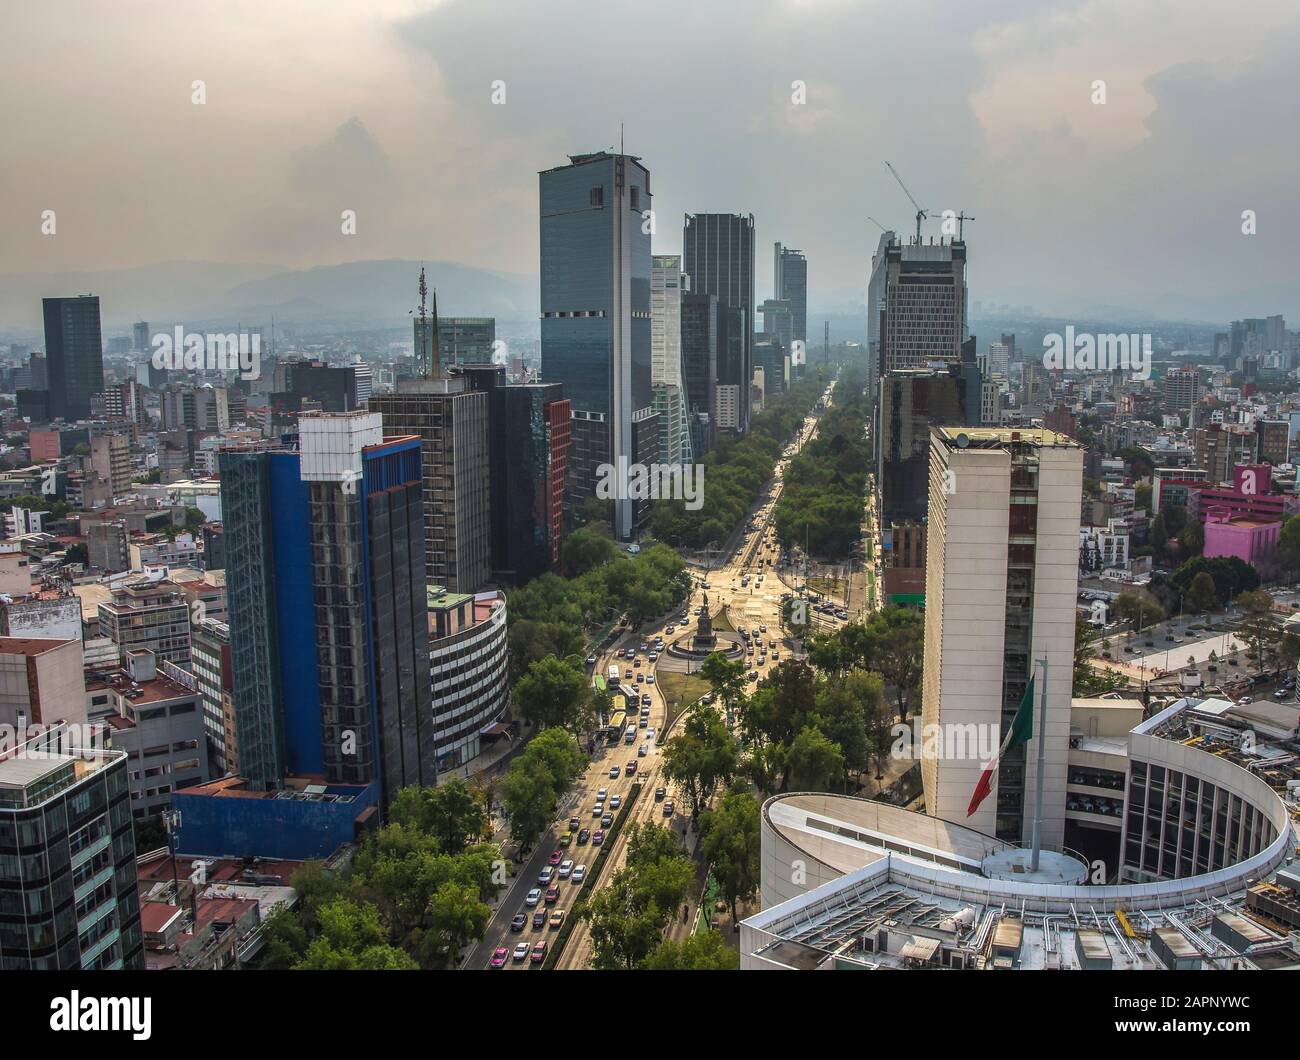 Skyline in Mexico City, view from the rooftop building. Paseo de la Reforma panoramic view Stock Photo